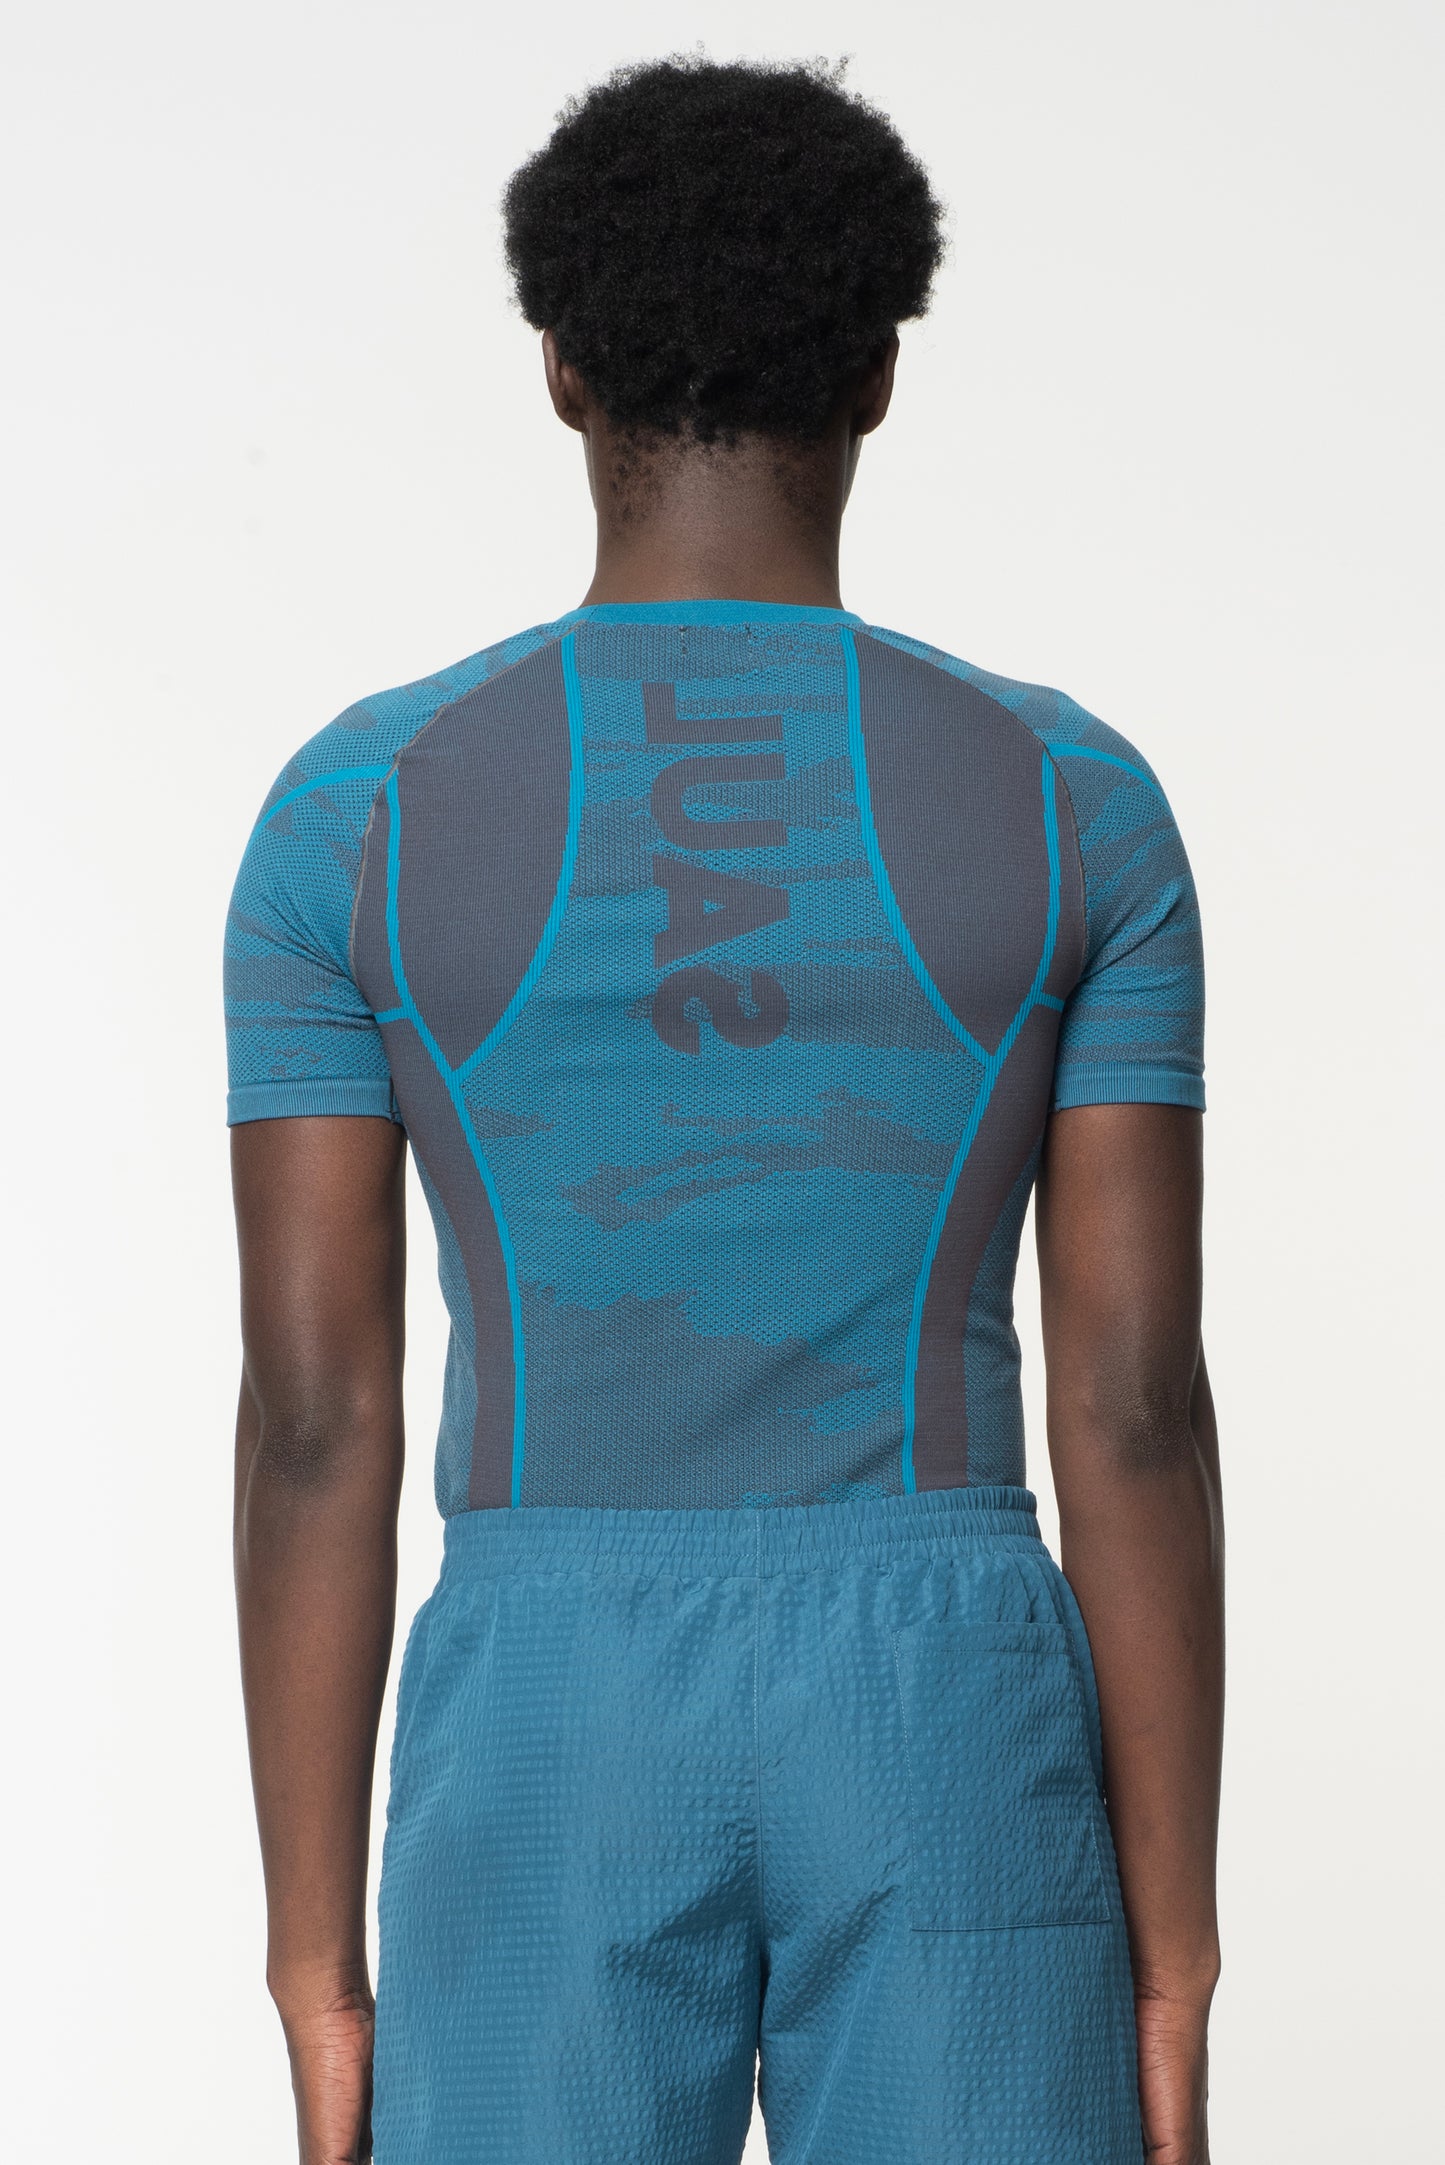 INDIAN OCEAN SHORT SLEEVE SEAMLESS KNIT COMPRESSION - TEAL/ANTHRACITE